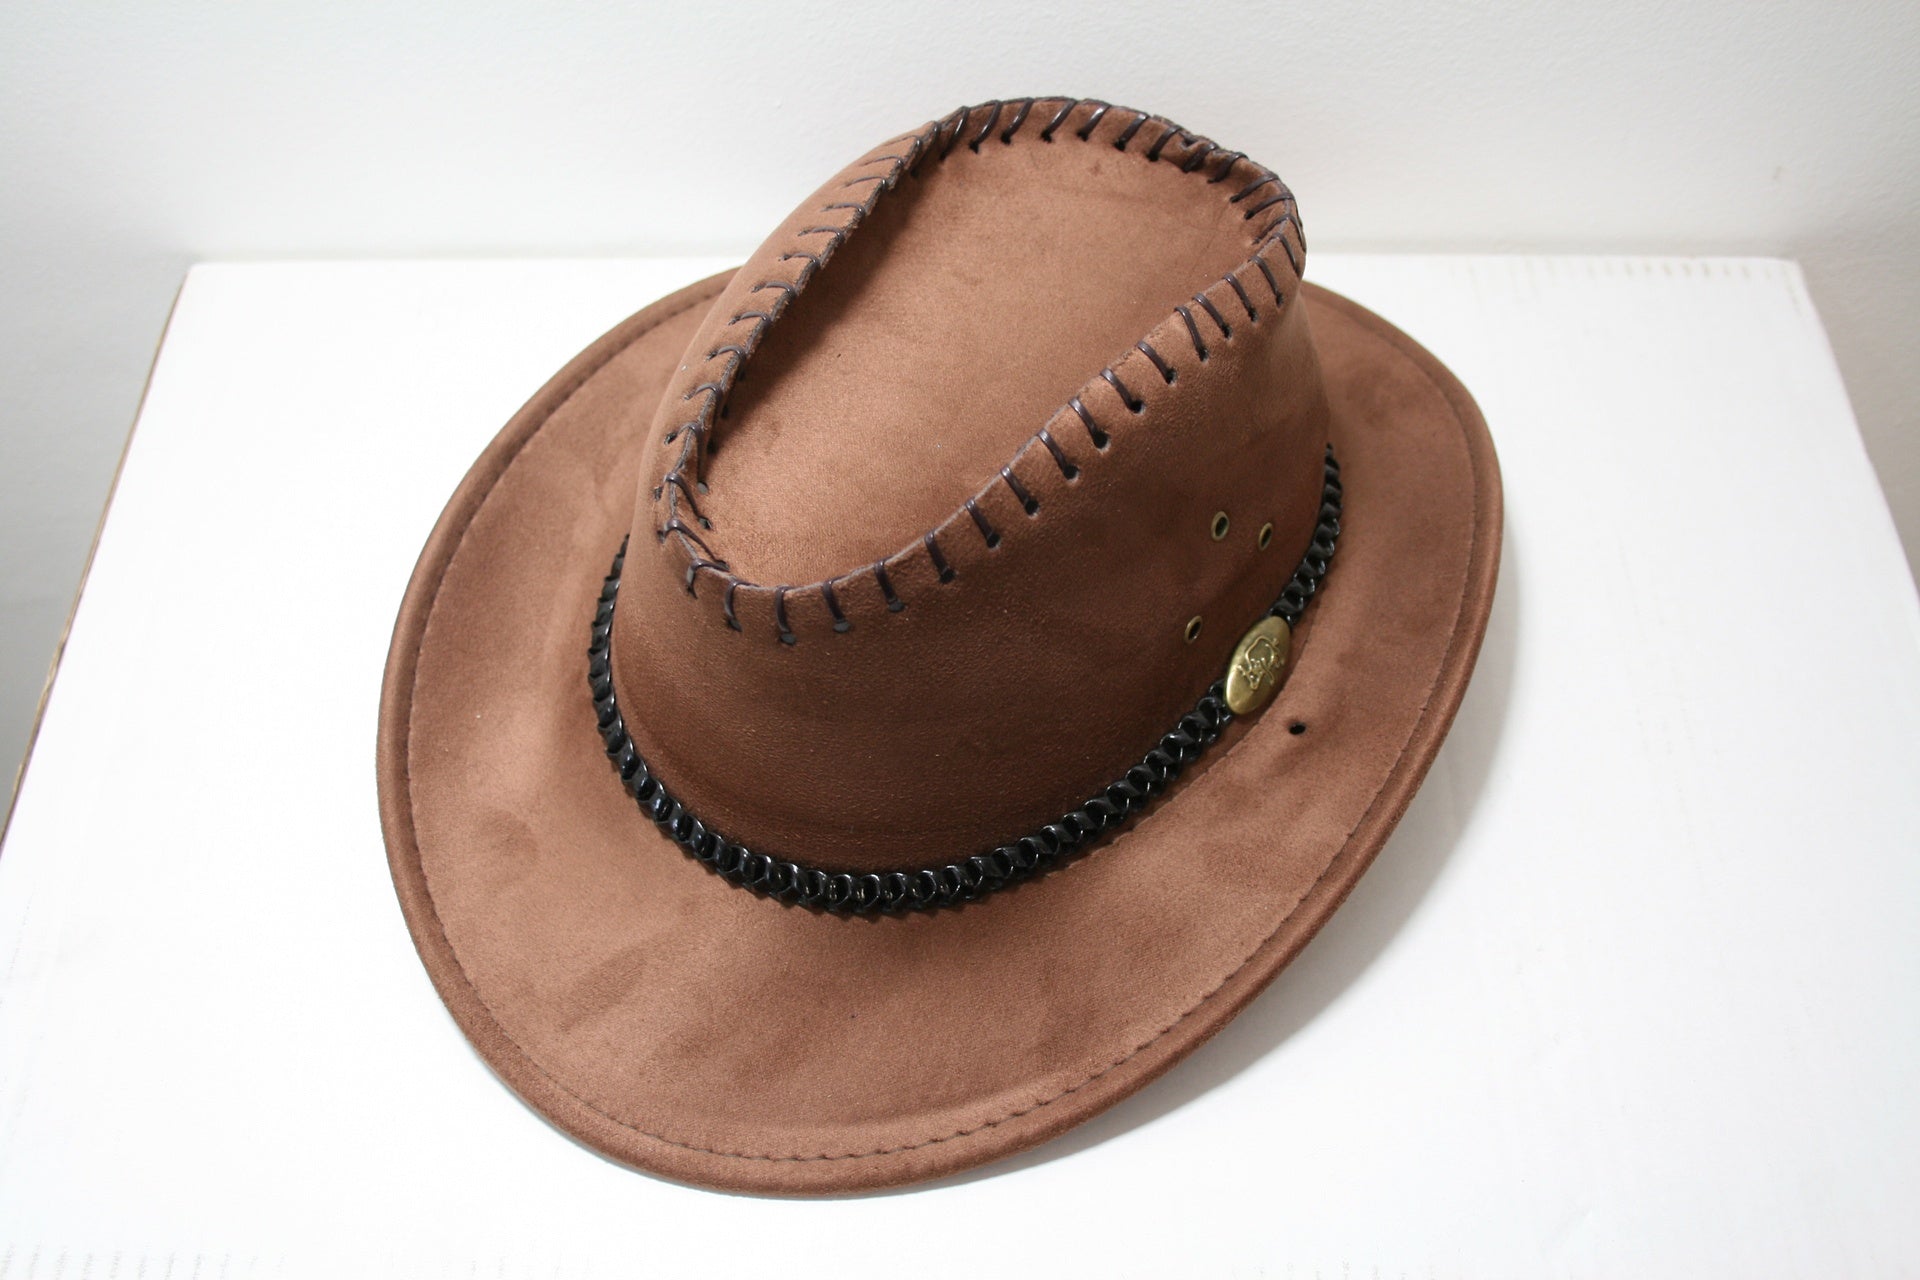 Hat Cowboy Stitches Dress Up Not specified 